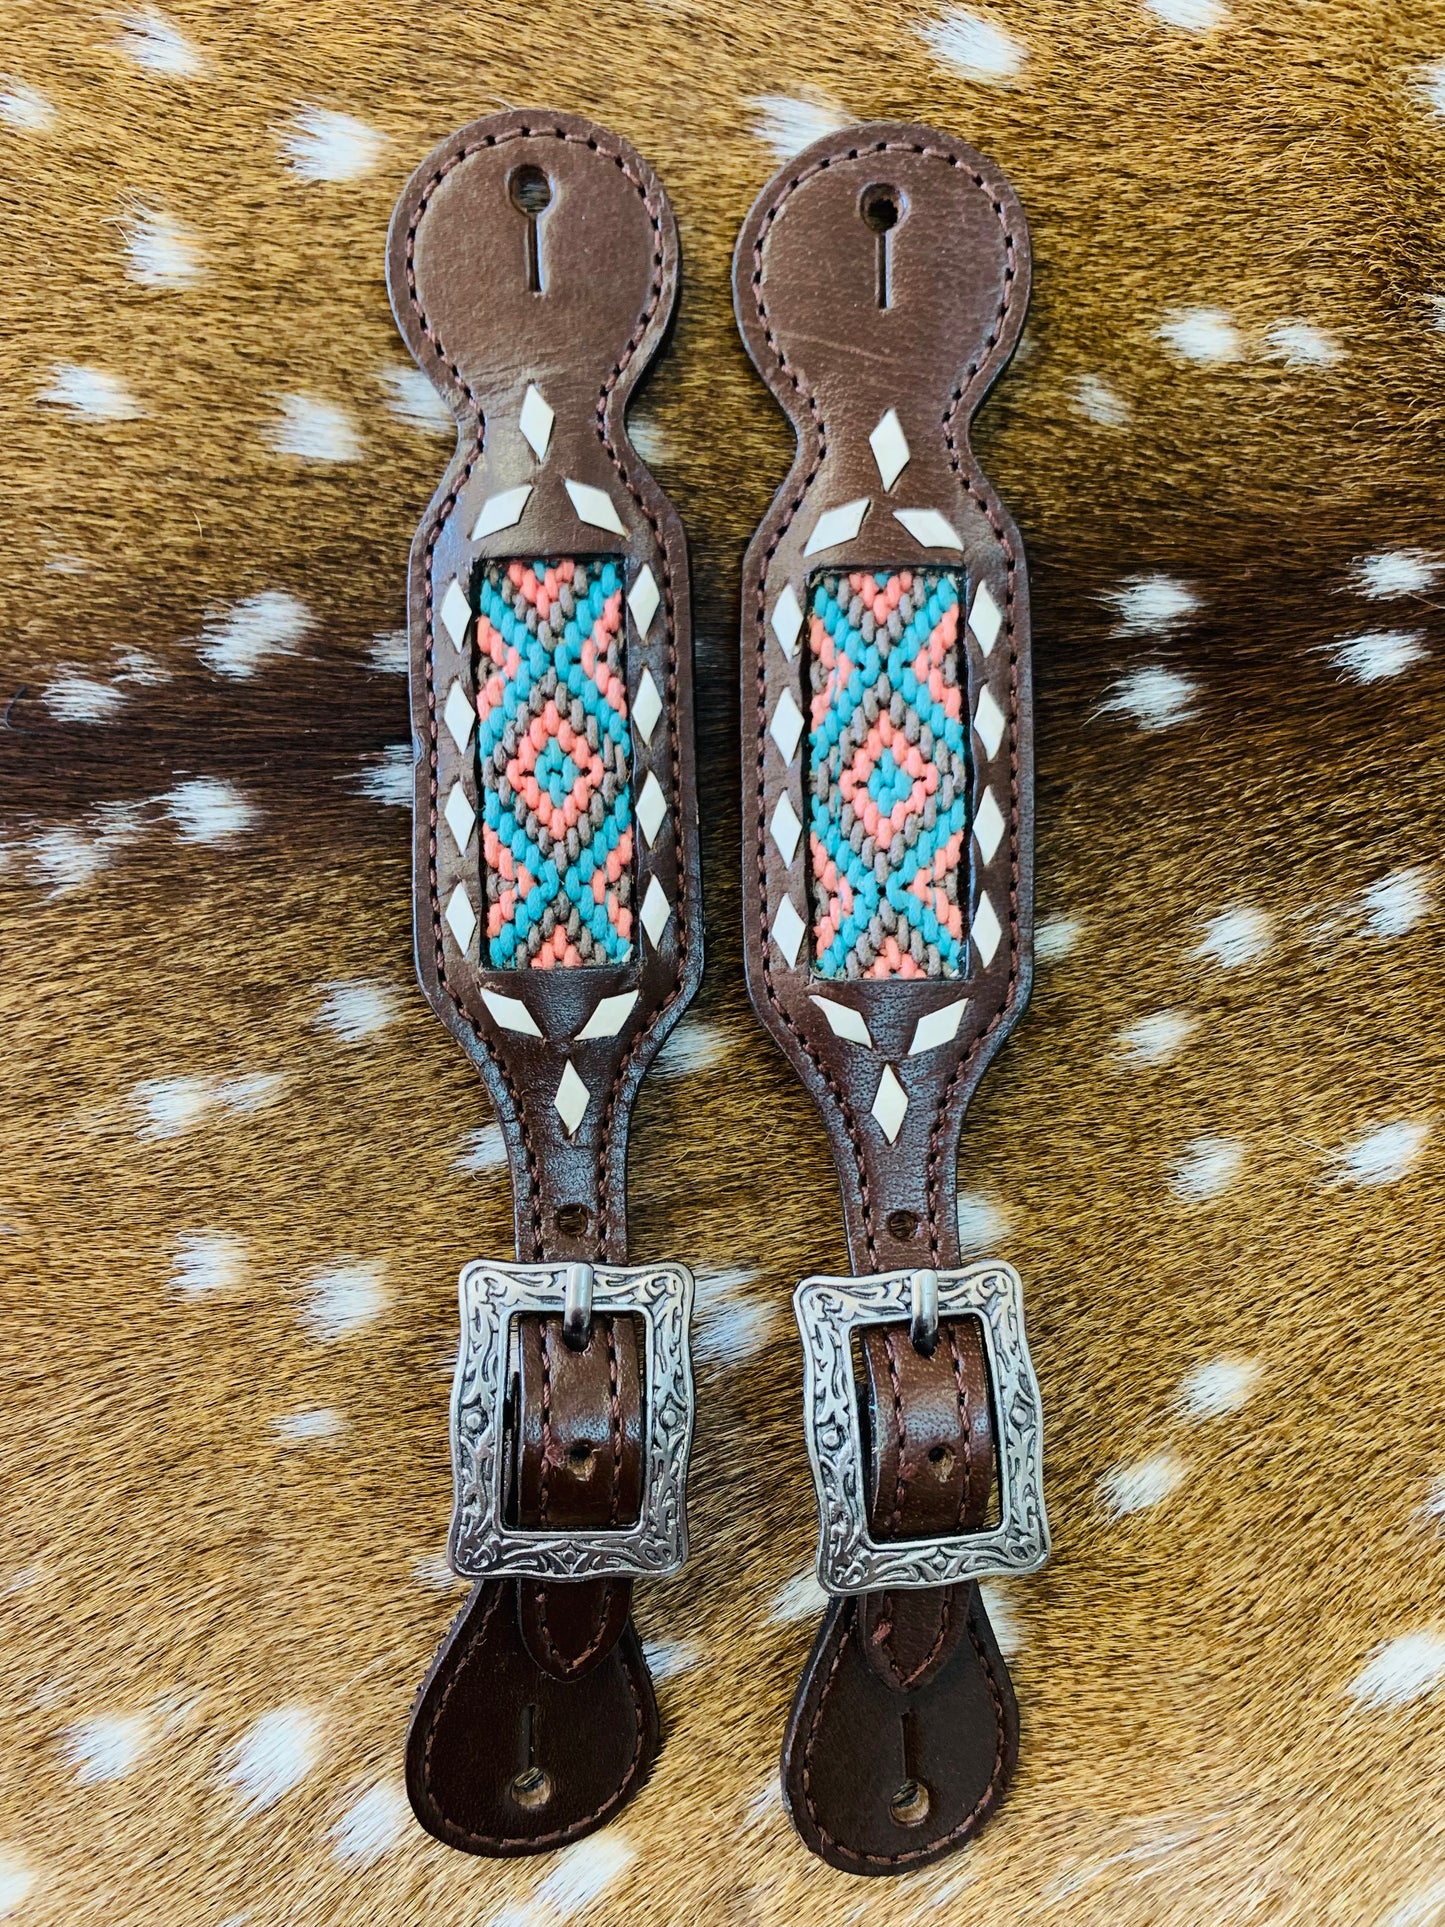 Women’s Leather Spur Straps With Woven Fabric Inlay